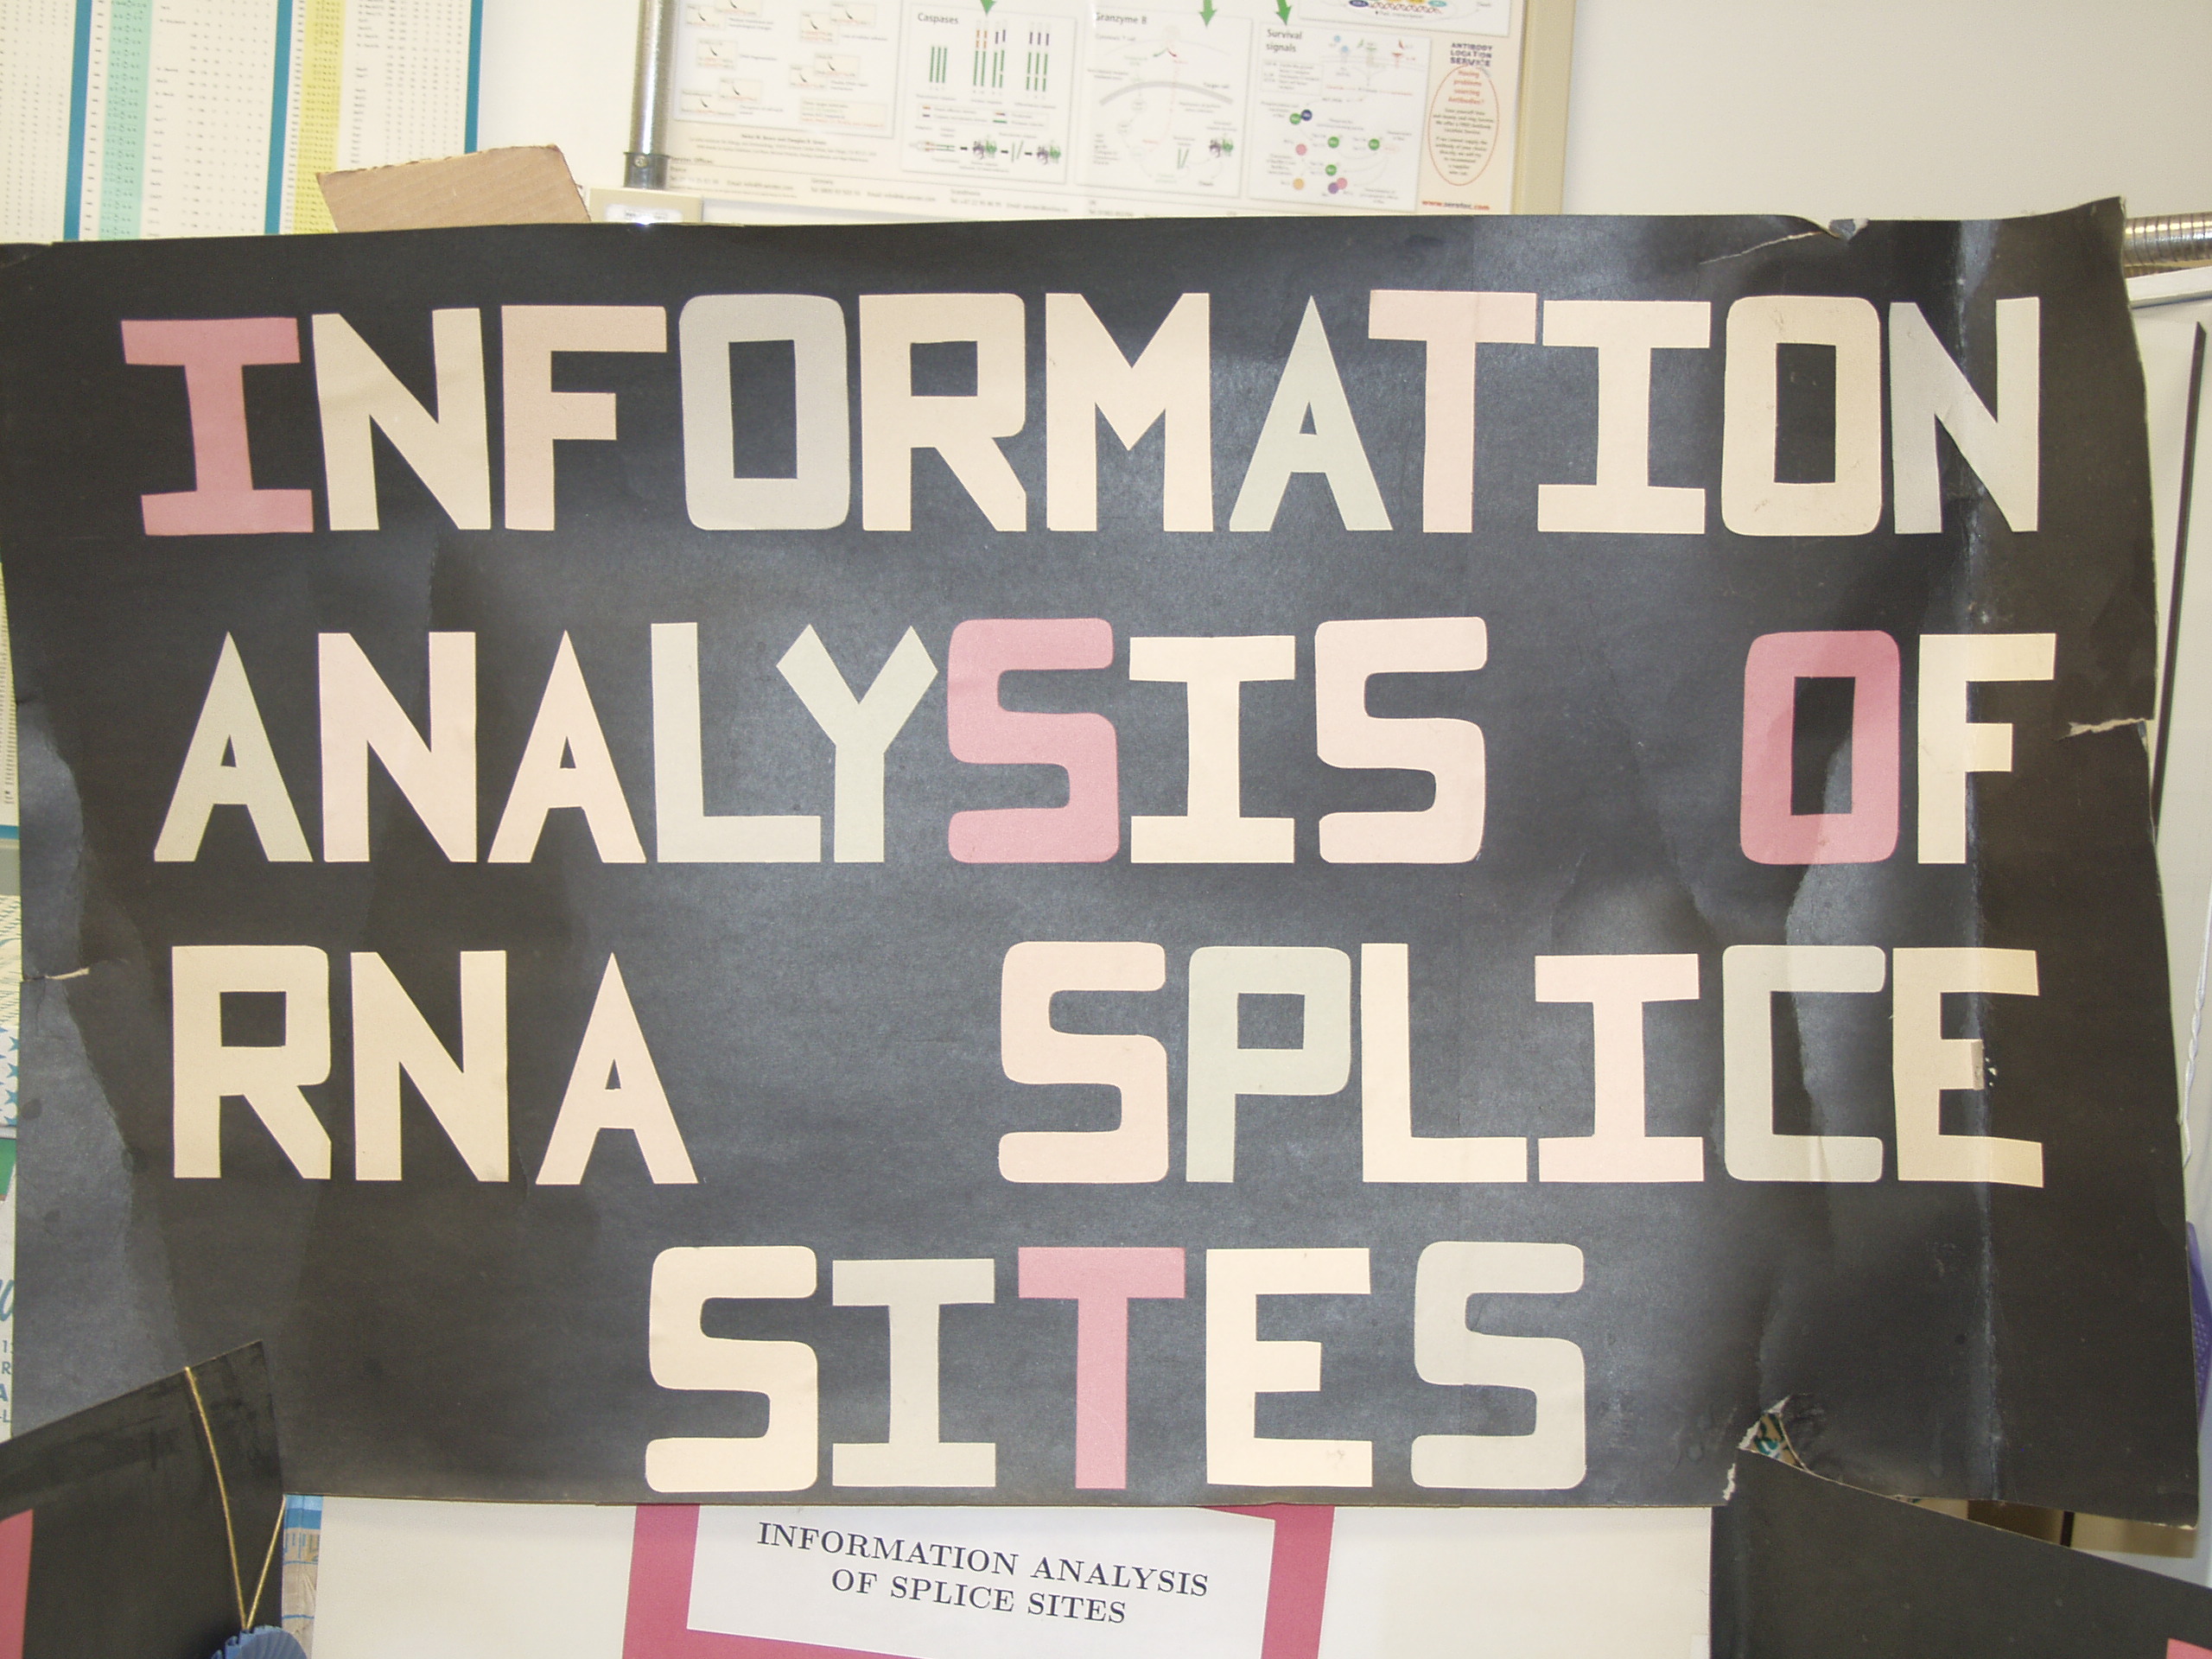 P8237770.JPG Photograph of Mike Stephen's 1990 science fair poster 'Information analysis of RNA splice sites'